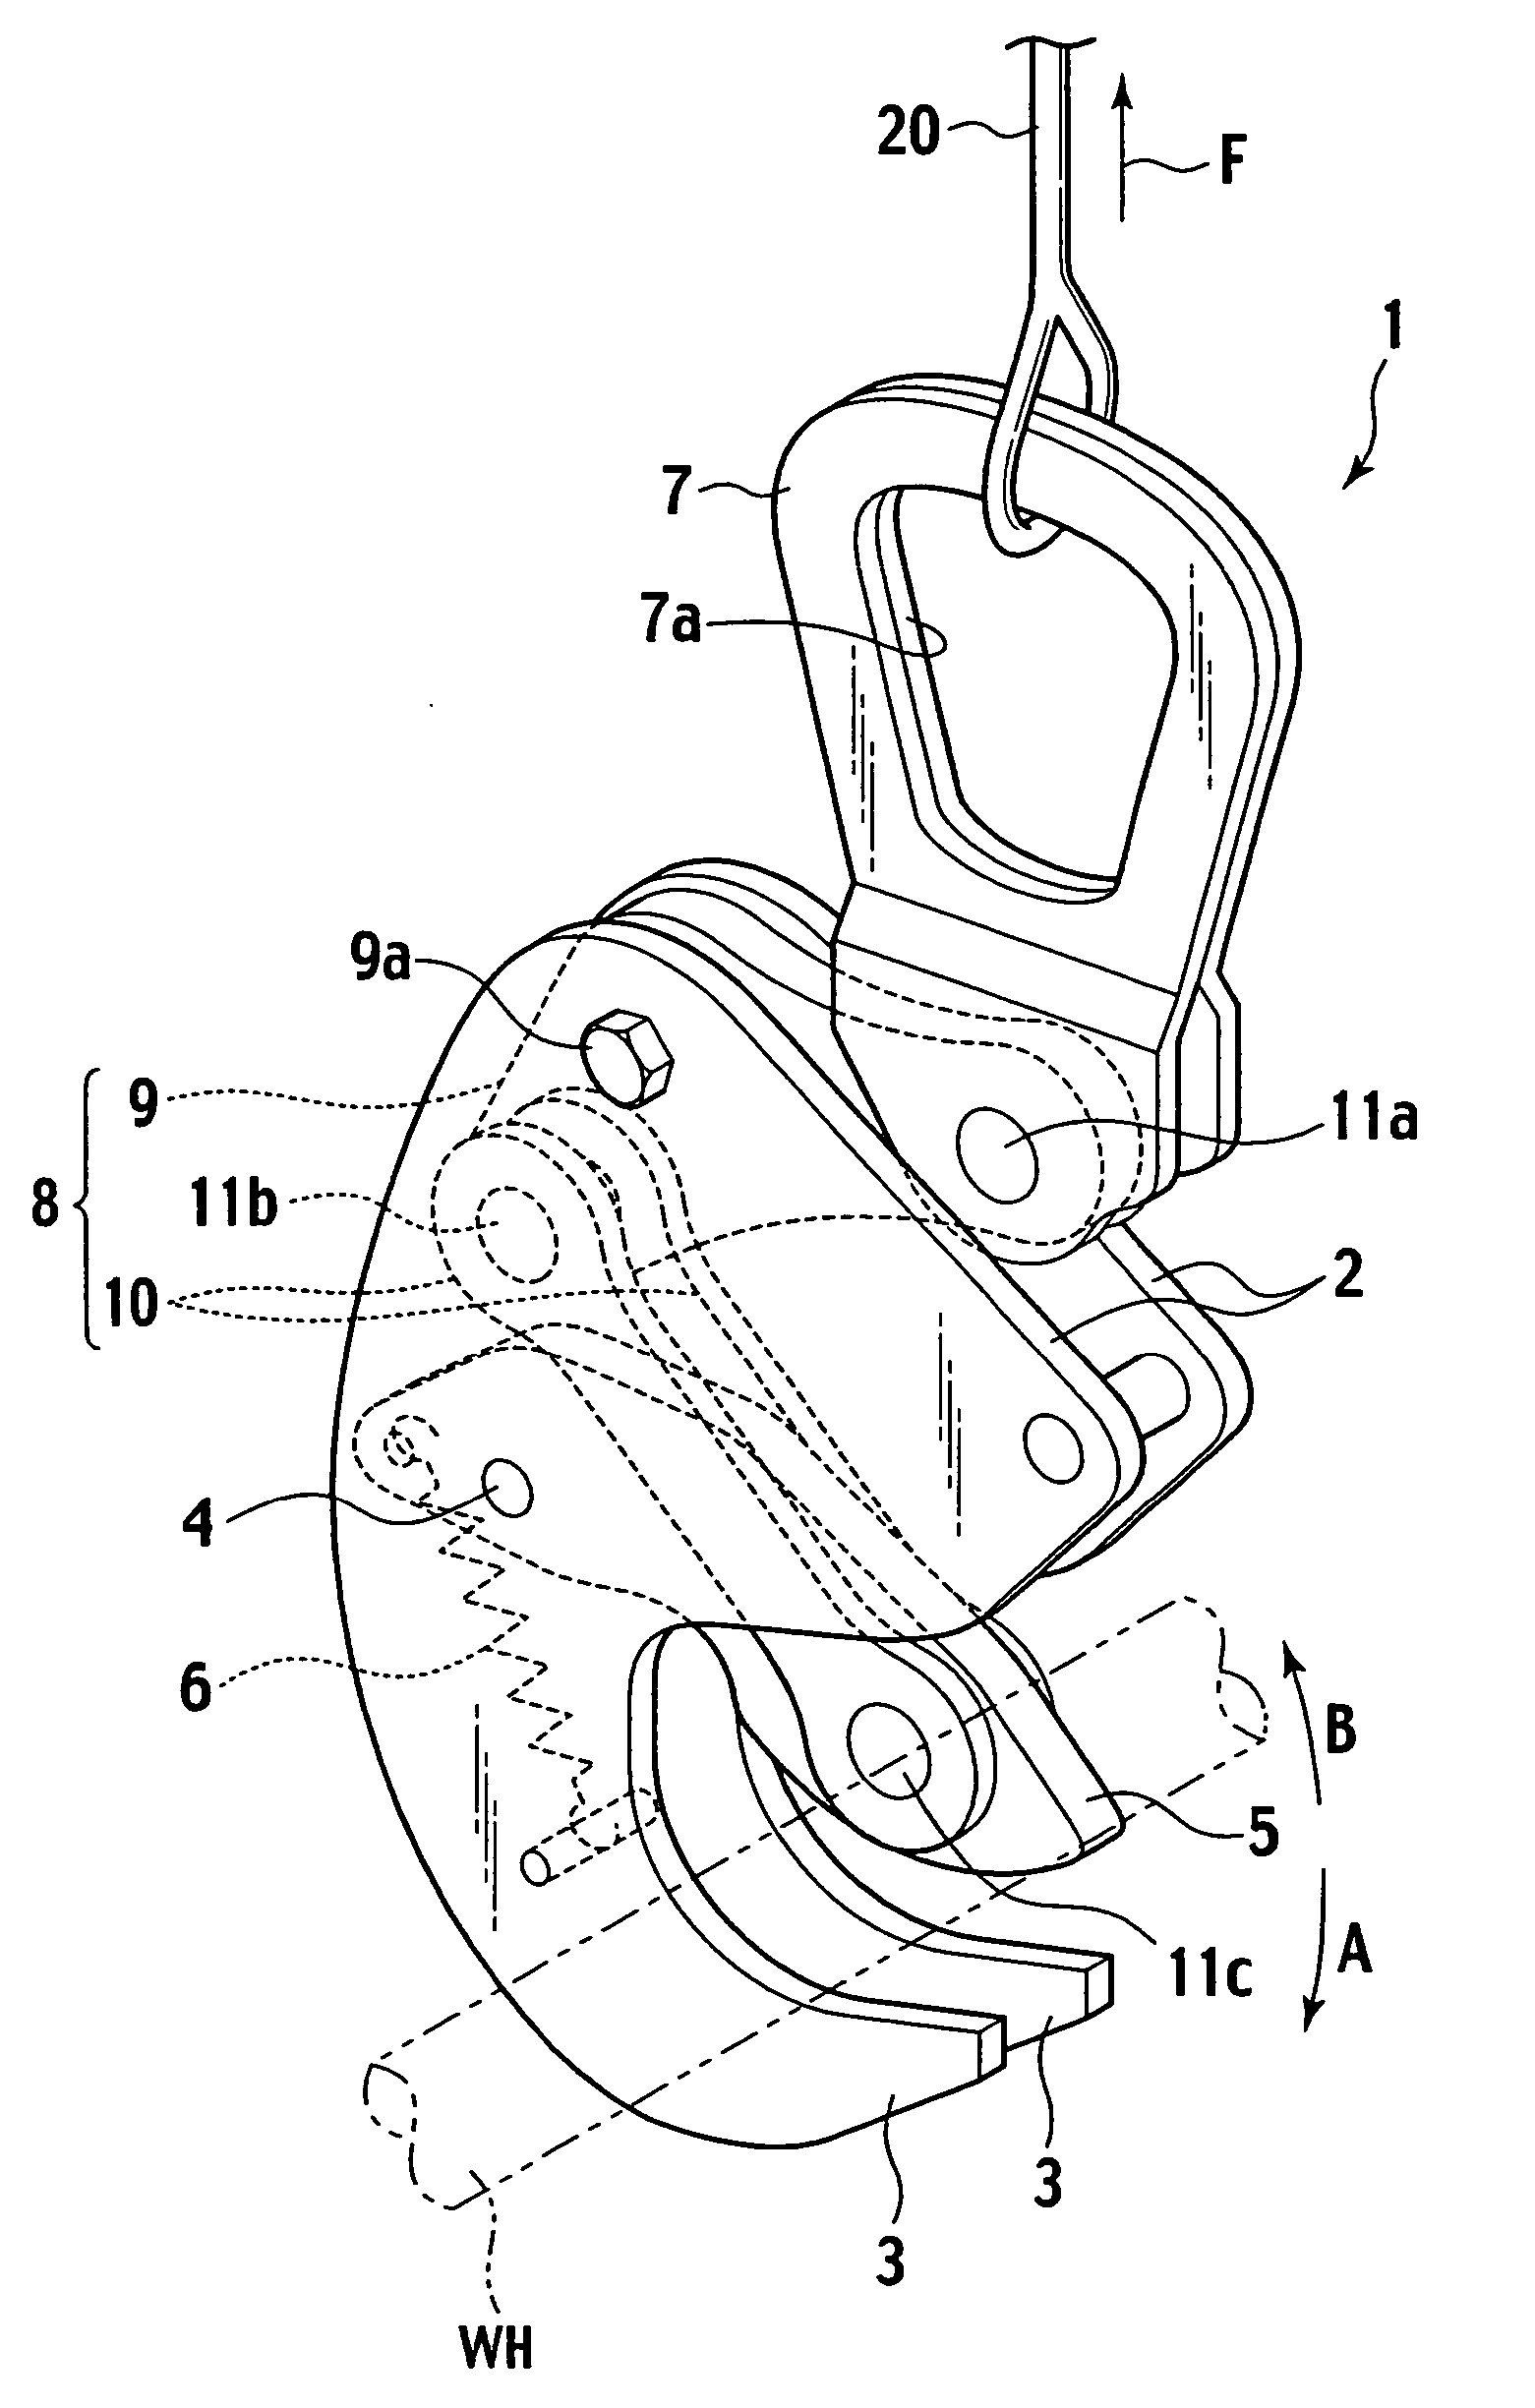 Hook and method for separating wire harness using the same